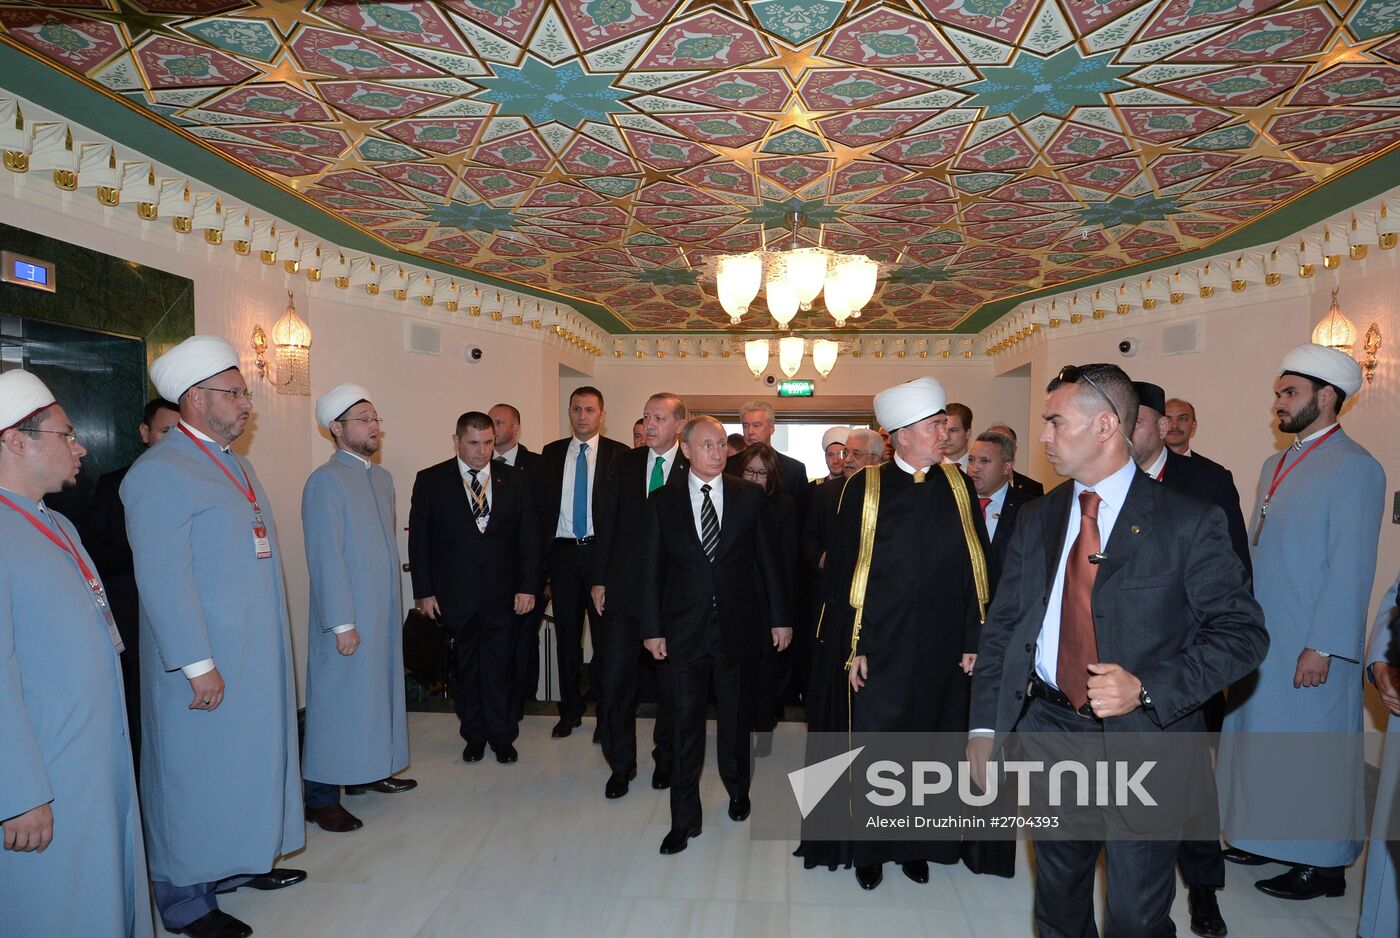 President Vladimir Putin attends opening of renovated Moscow Cathedral Mosque